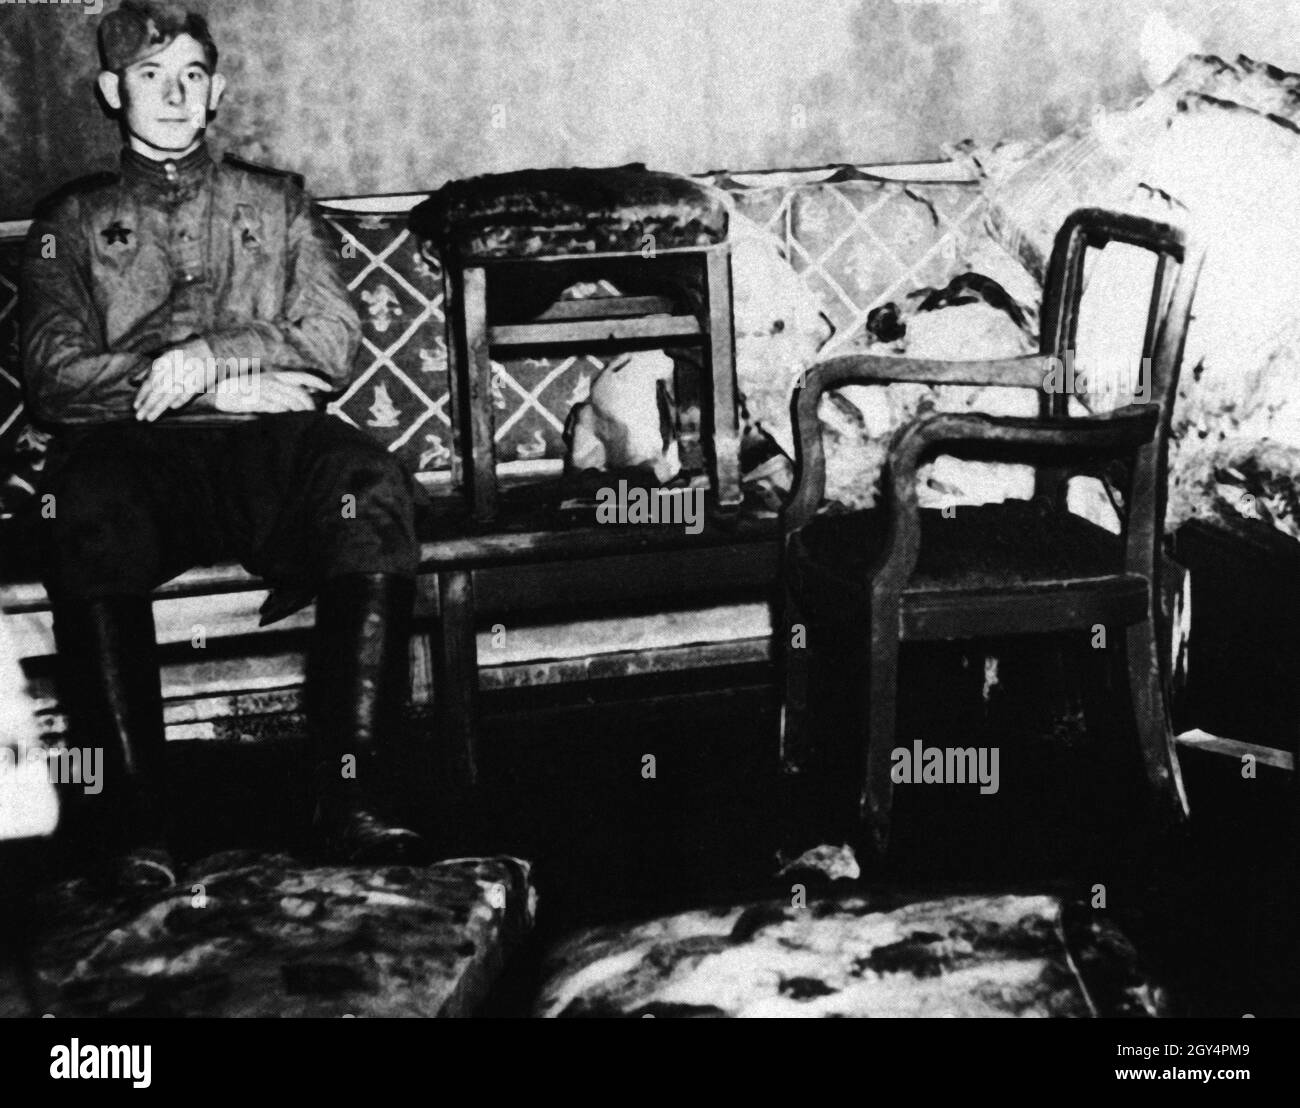 The picture, taken by an American soldier in early July, shows a Red Army soldier in the room in the Führerbunker, the study where Adolf Hitler and Eva Braun committed suicide. With his boots, the soldier stands on the upholstered parts of the sofa on which Adolf and Eva Hitler killed themselves. [automated translation] Stock Photo